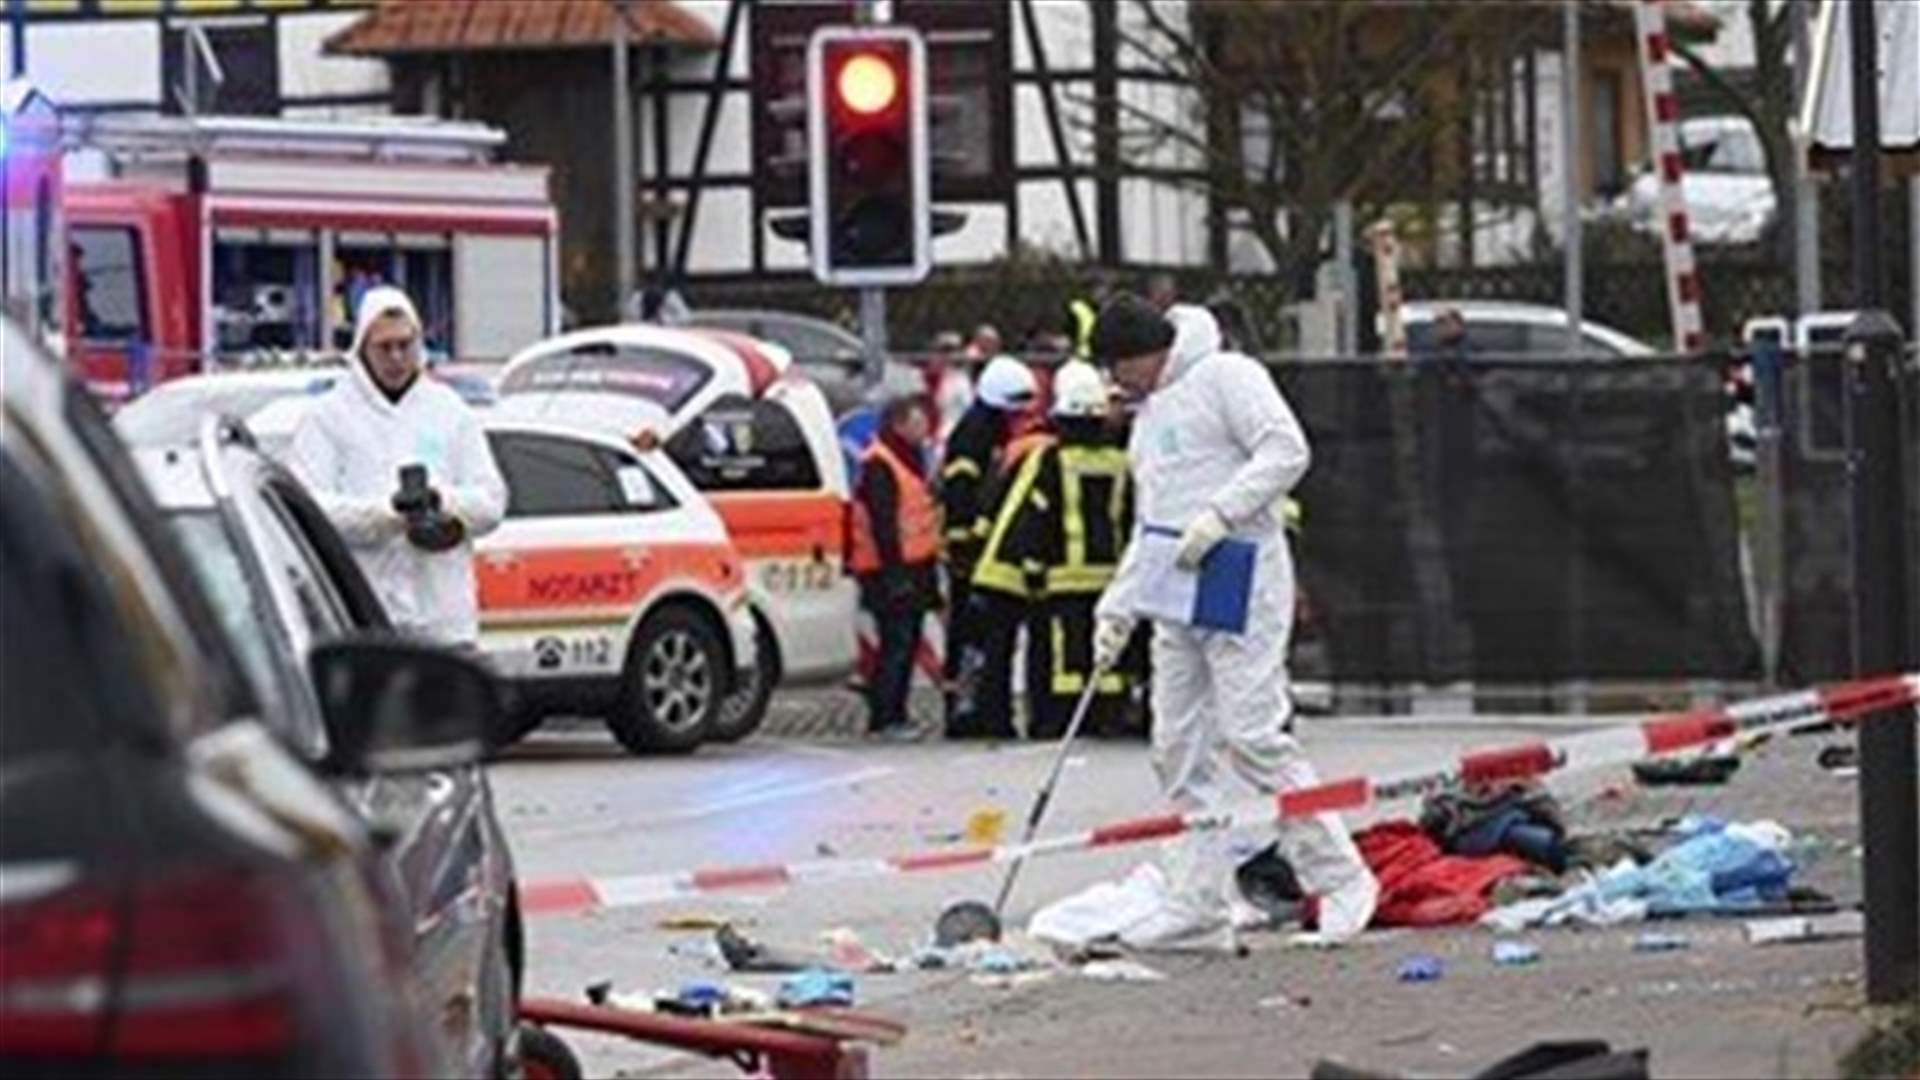 Police investigate injured German, 29, suspected of driving into carnival